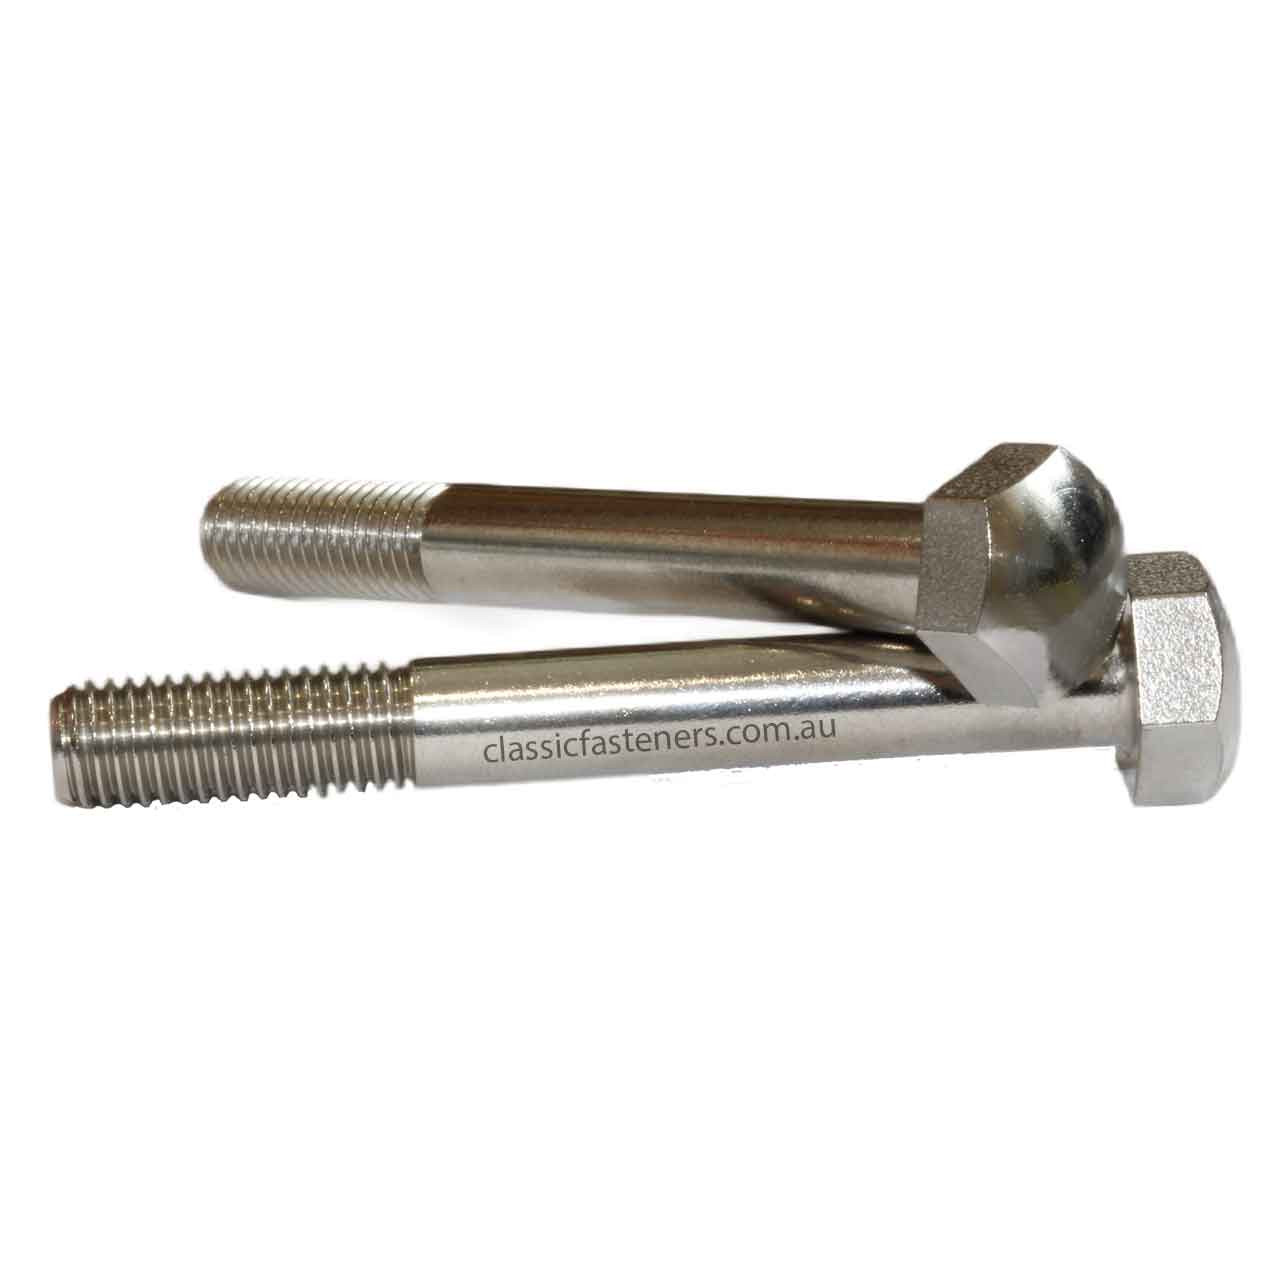 5/16 BSF x 2 1/2 Dome Head Stainless Bolt